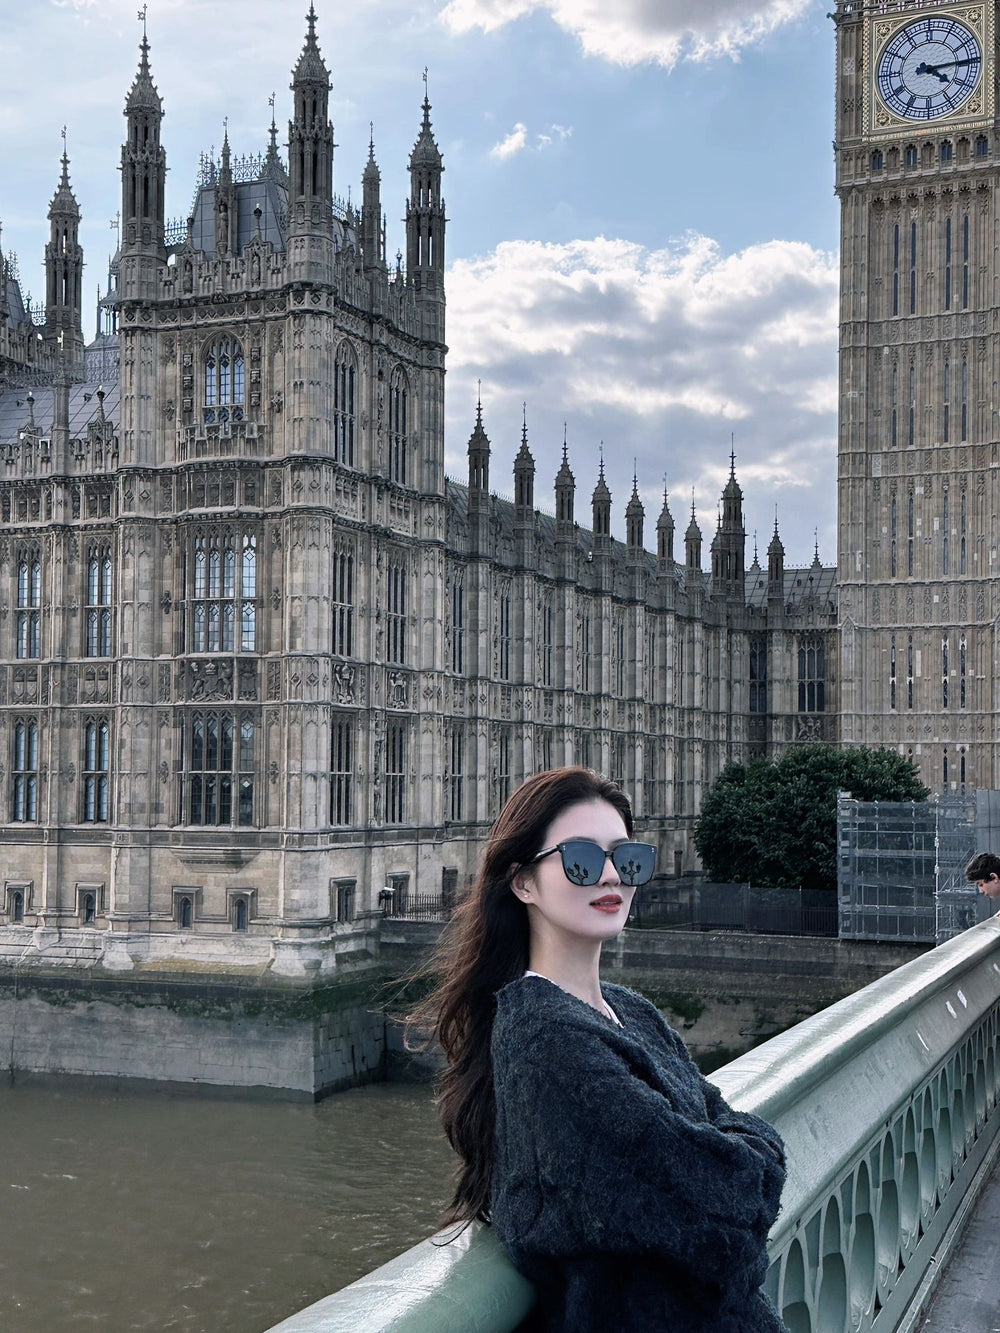  A stylish woman in designer sunglasses posing on a bridge with Big Ben in the background.